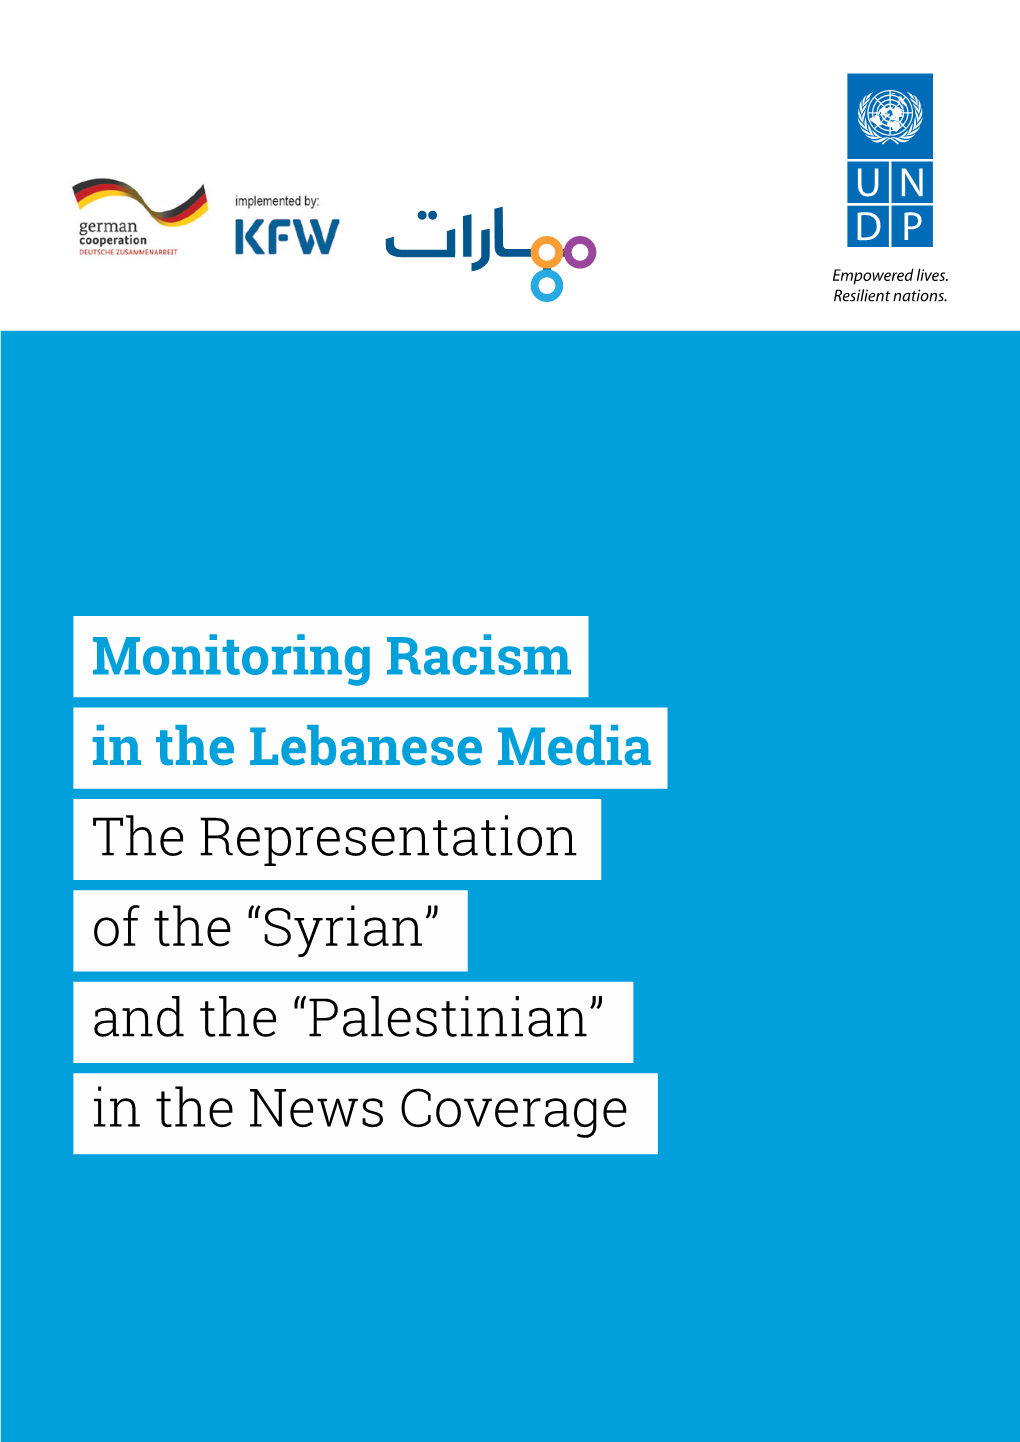 Monitoring Racism in the Lebanese Media the Representation of the “Syrian” and the “Palestinian” in the News Coverage Introduction